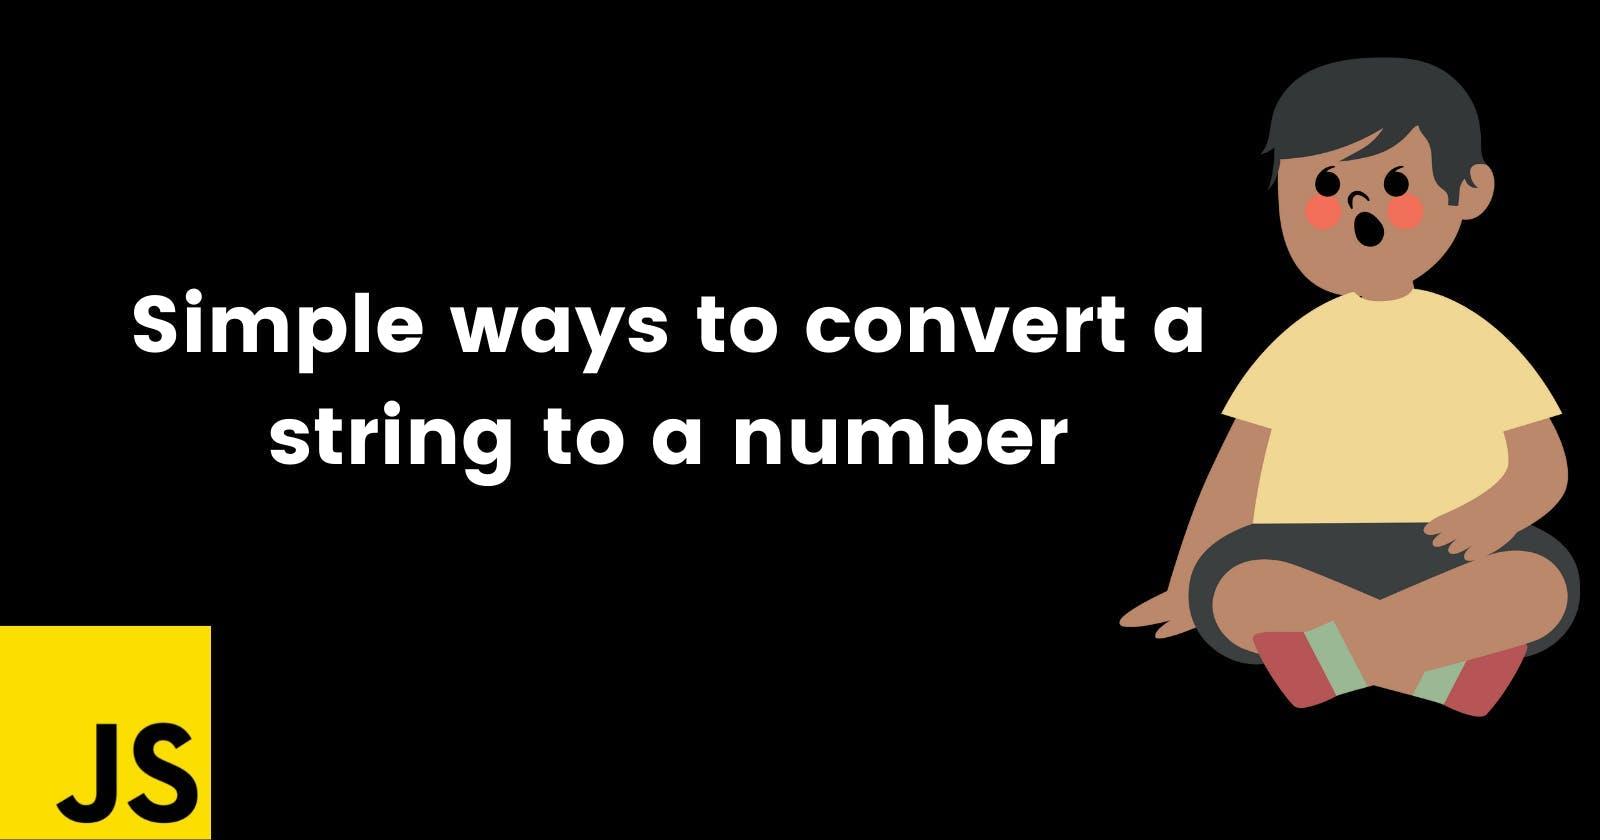 Simple ways to convert a string into a number